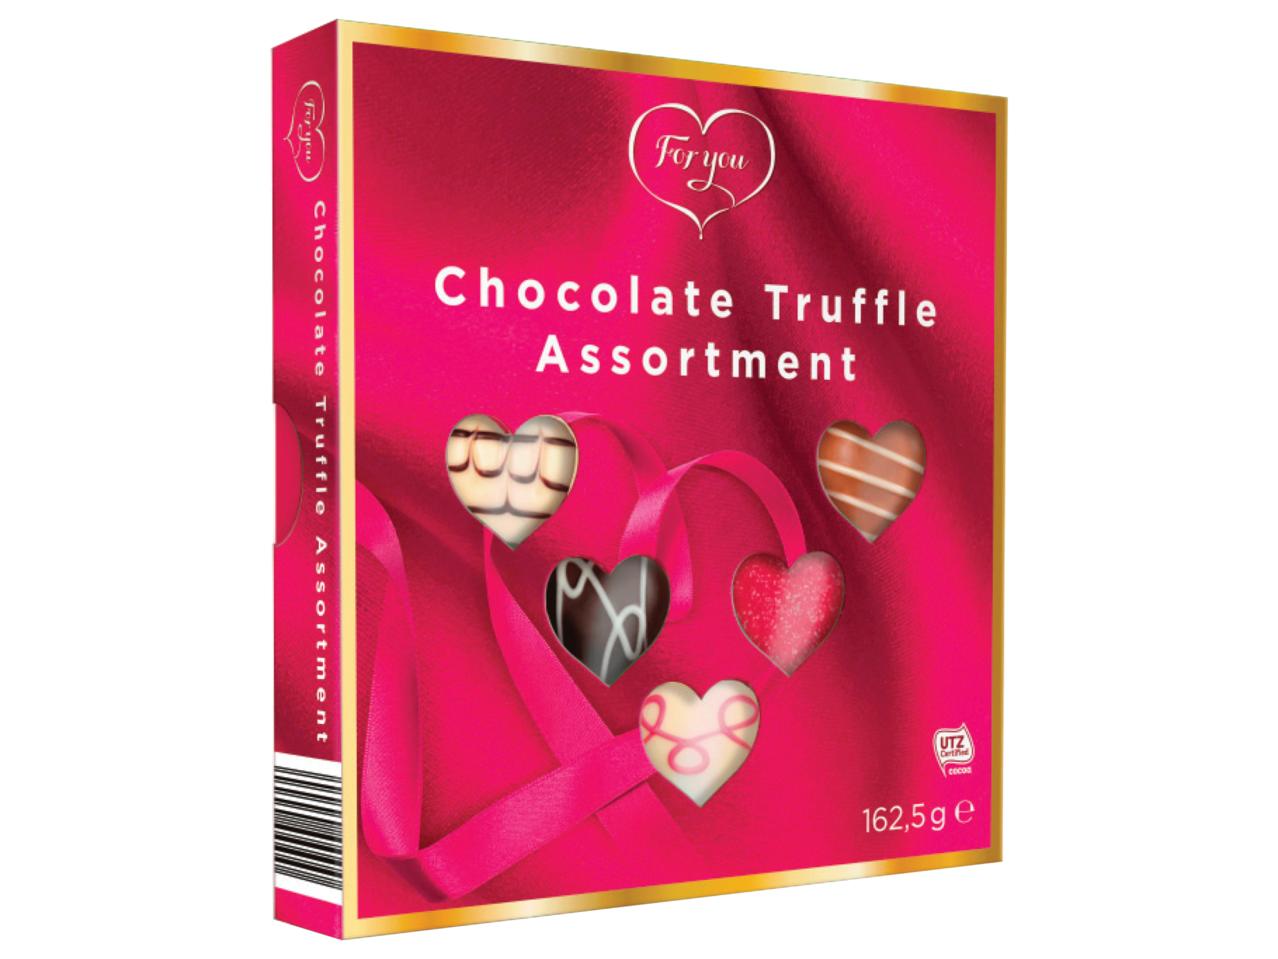 FOR YOU Chocolate Truffle Assortment